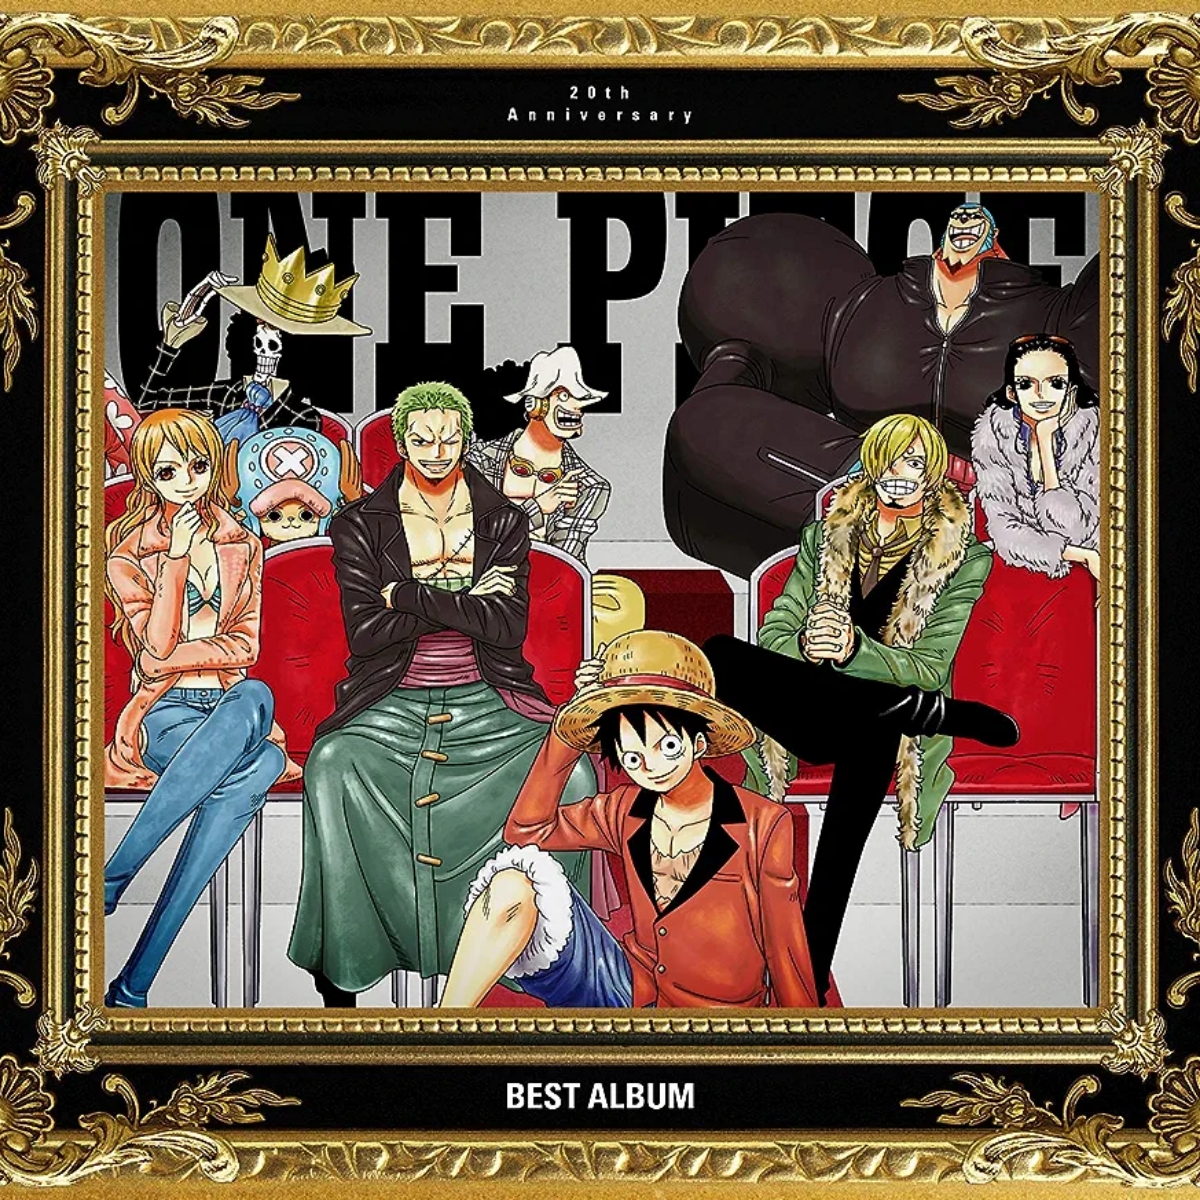 ONE PIECE 20th Aniversary BEST ALBUM [Limited Edition] - Osanime